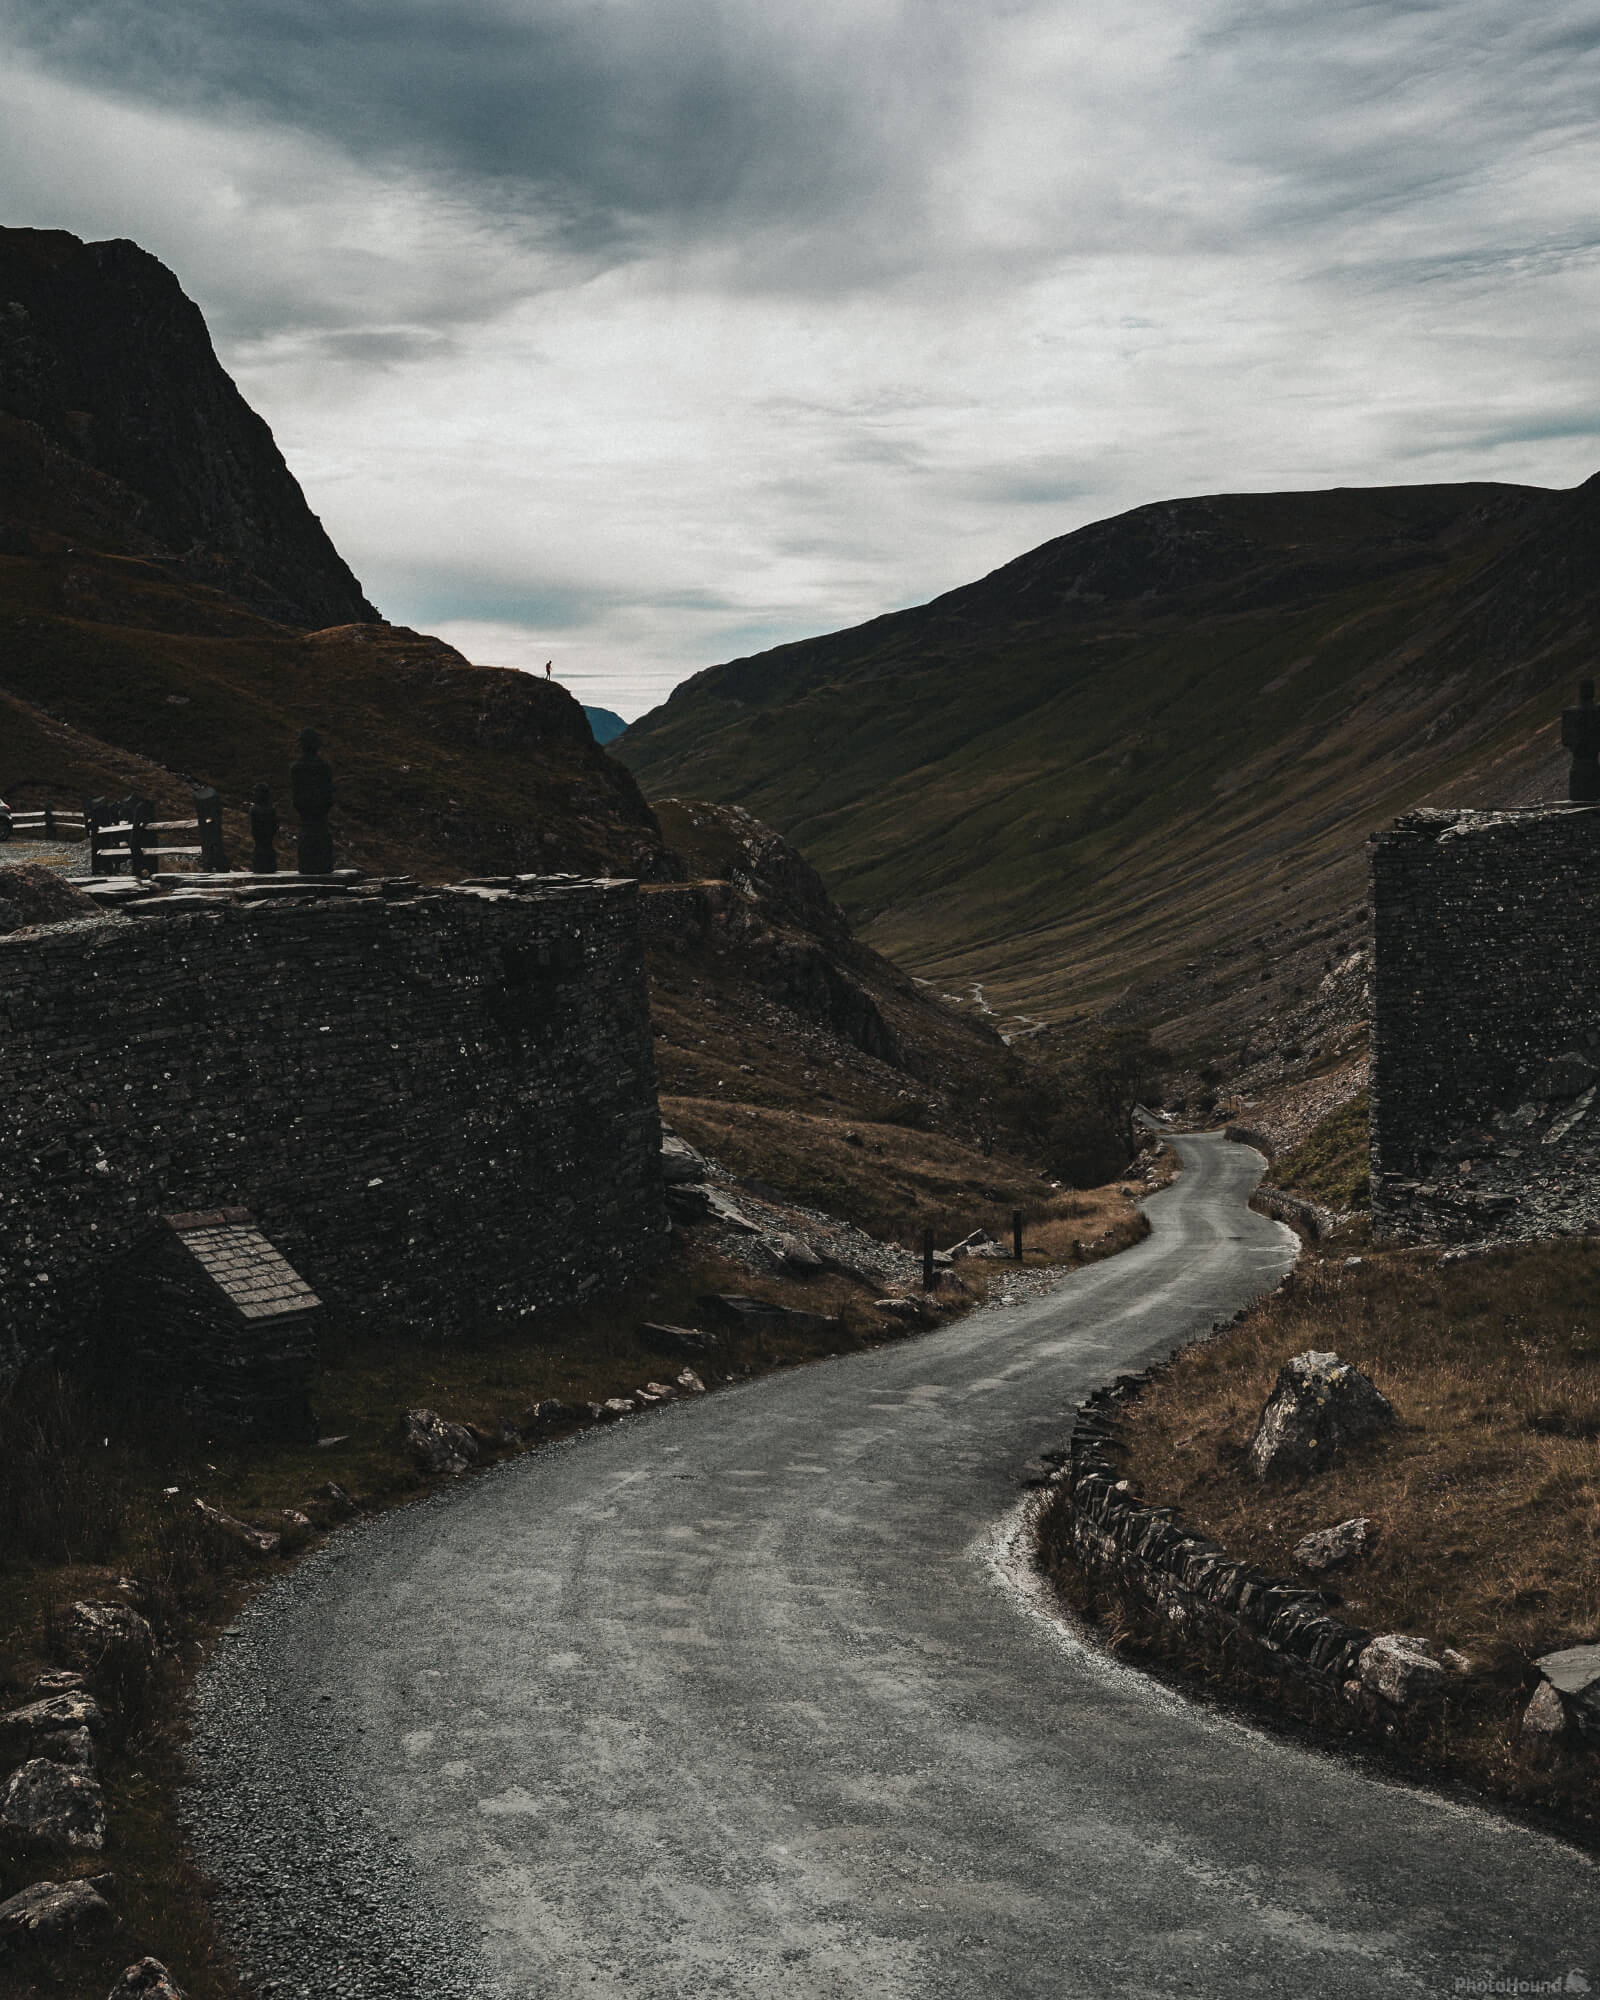 Image of Honister Pass by Daniel Phillips